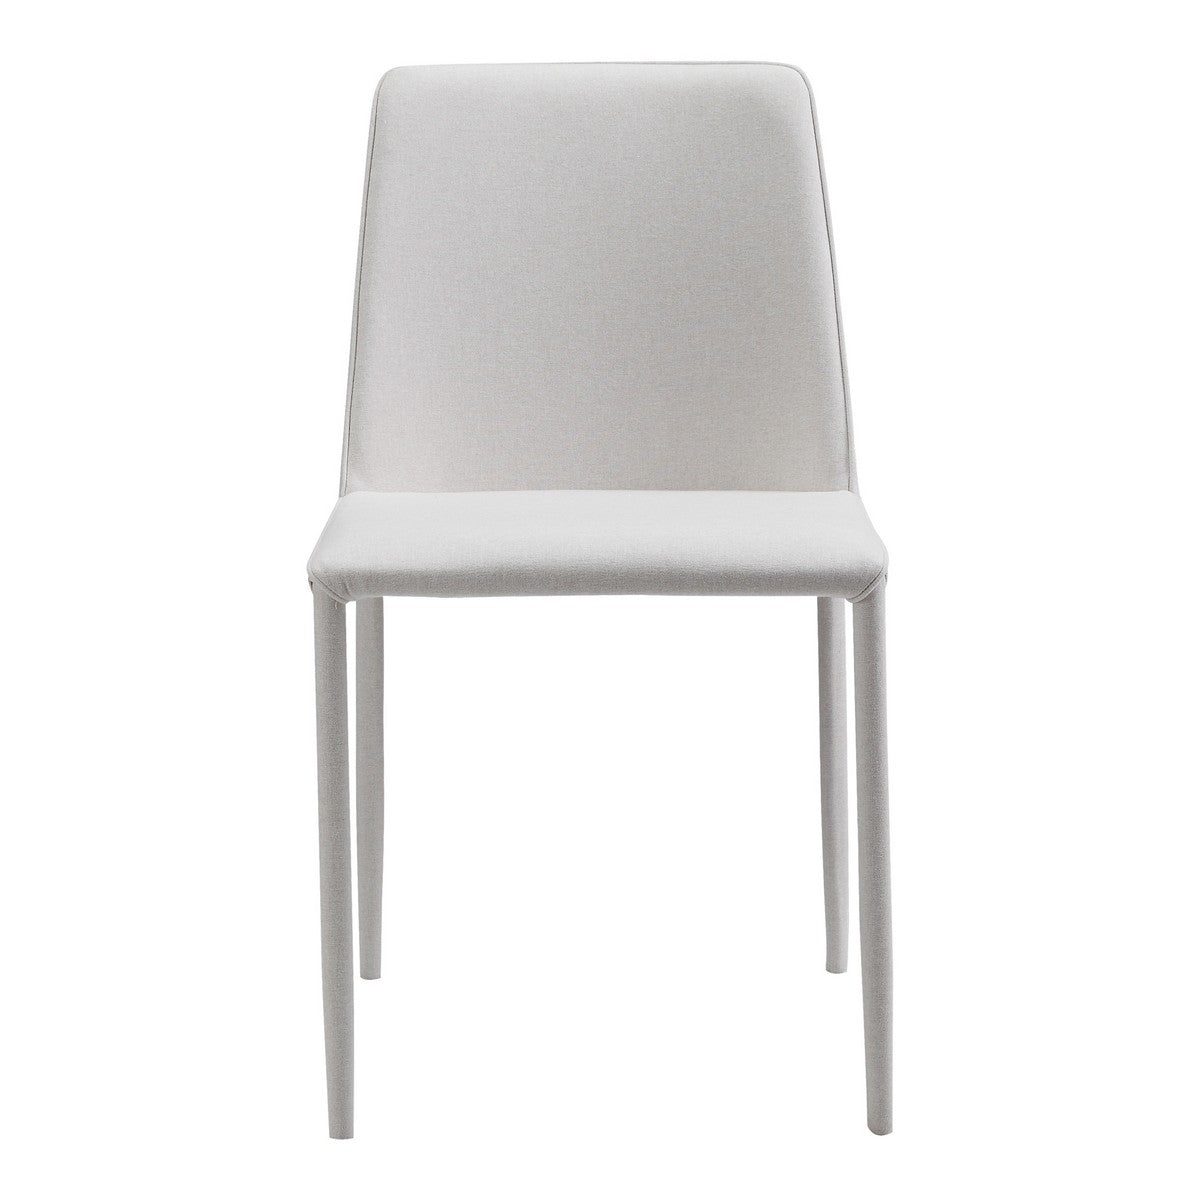 Moe's Home Collection Nora Fabric Dining Chair White-Set of Two - YM-1003-29 - Moe's Home Collection - Dining Chairs - Minimal And Modern - 1